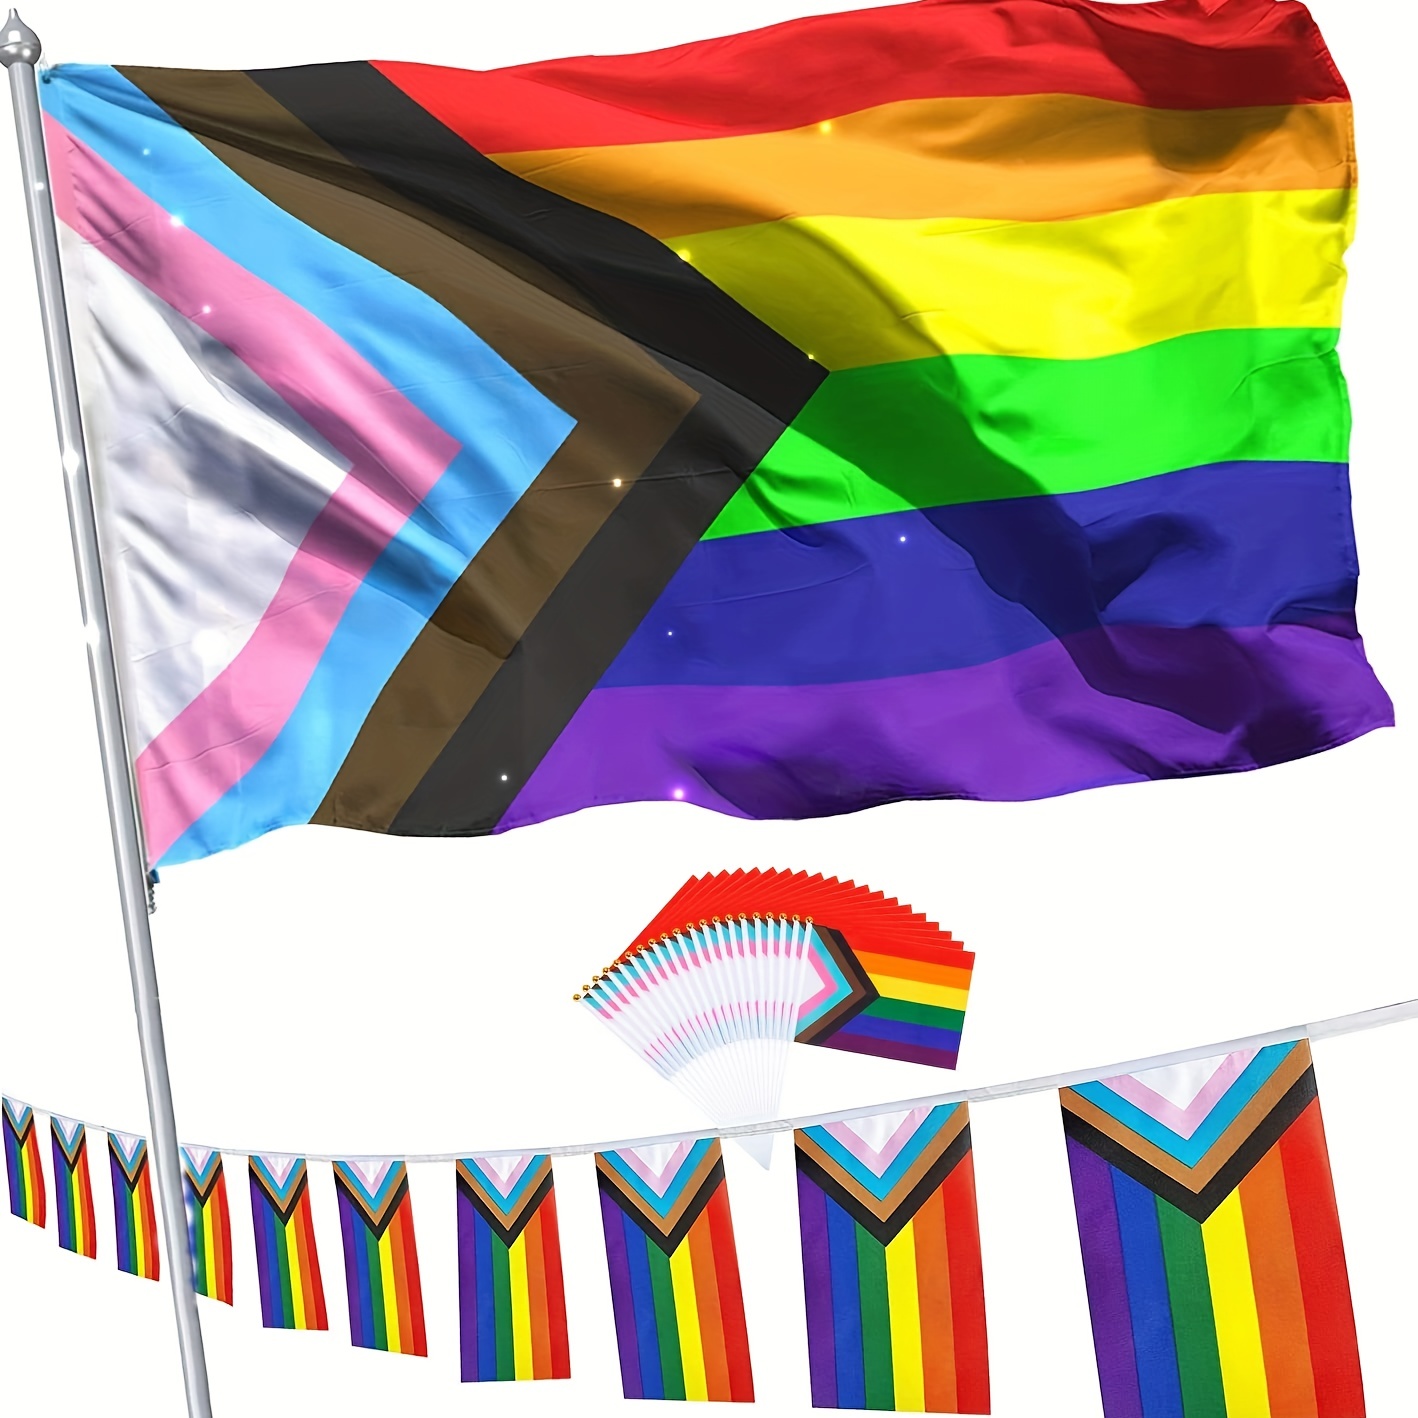  Transgender Trans Pride Rainbow Flag 3x5Ft Outdoor- LGBT Pride  Flags Banner with Brass Grommets for Outdoor Wall : Sports & Outdoors